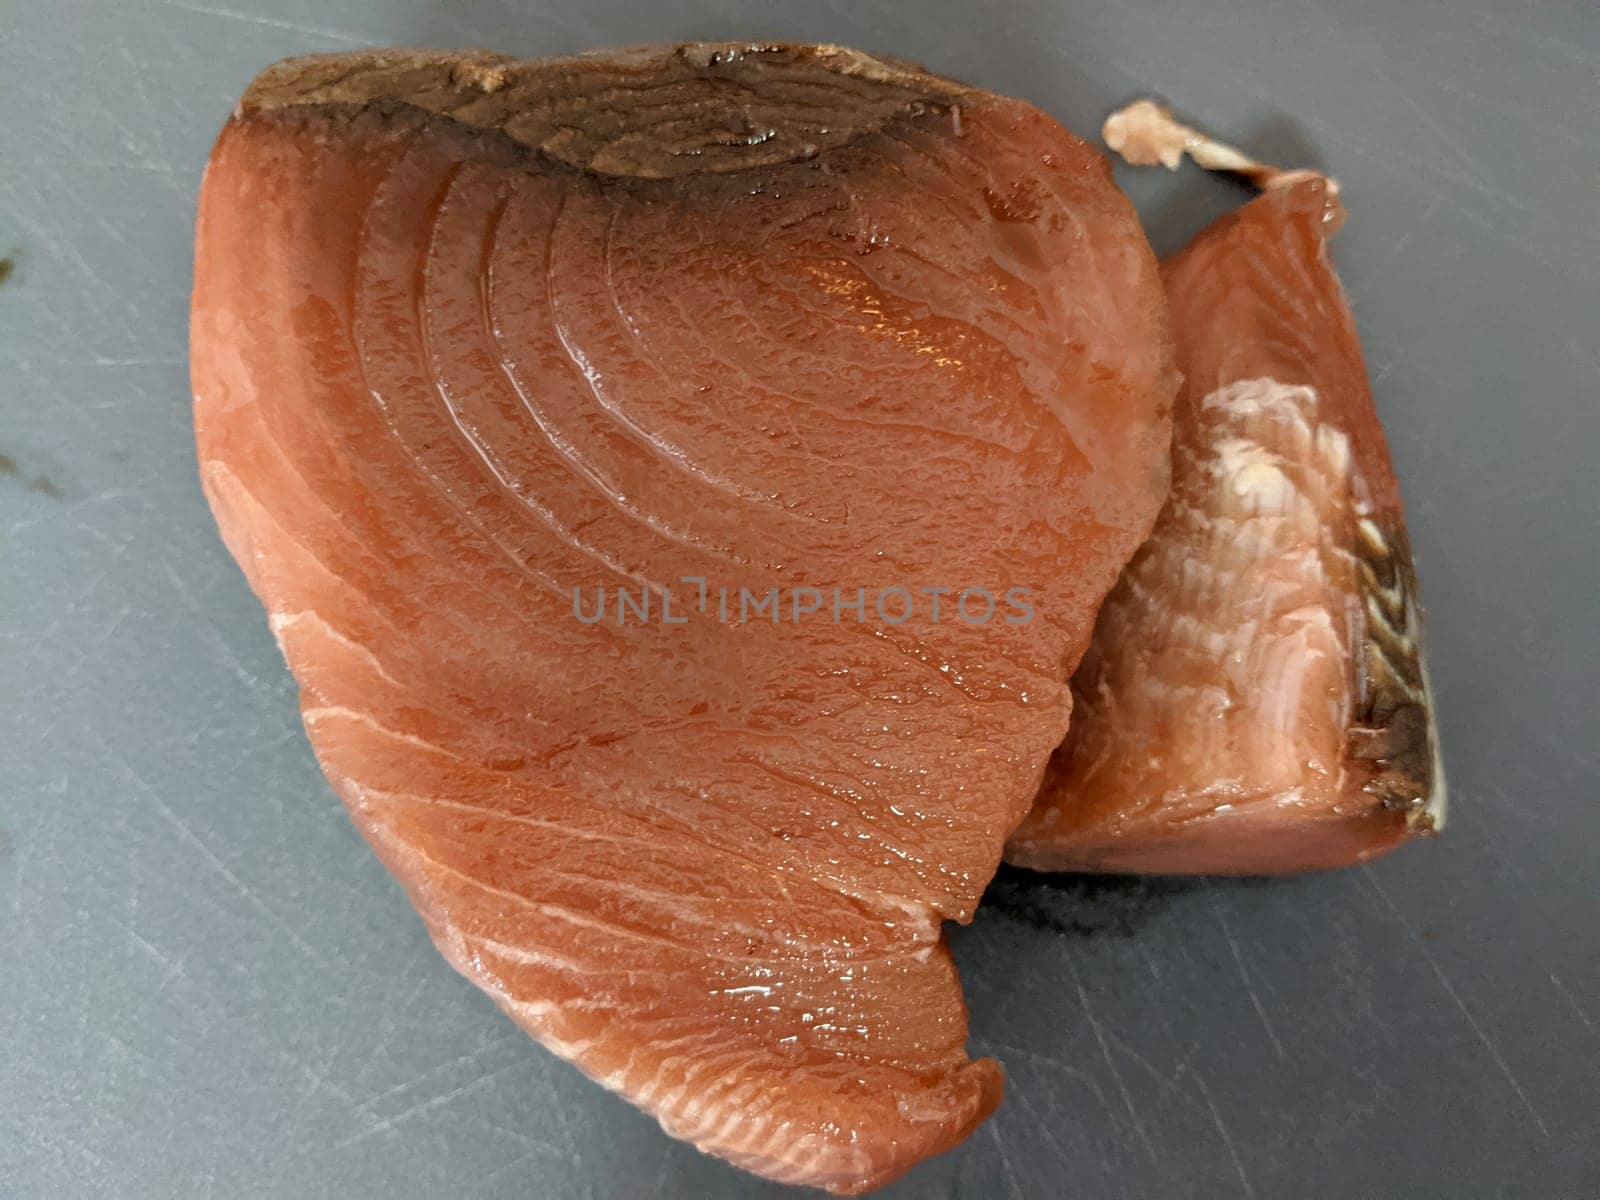 Two fresh fish fillets on a gray surface, ready to be cooked. The fillets are pink in color and have a shiny texture. The fillets are cut in a way that they are ready to be cooked. The background is a gray surface, possibly a kitchen countertop.
